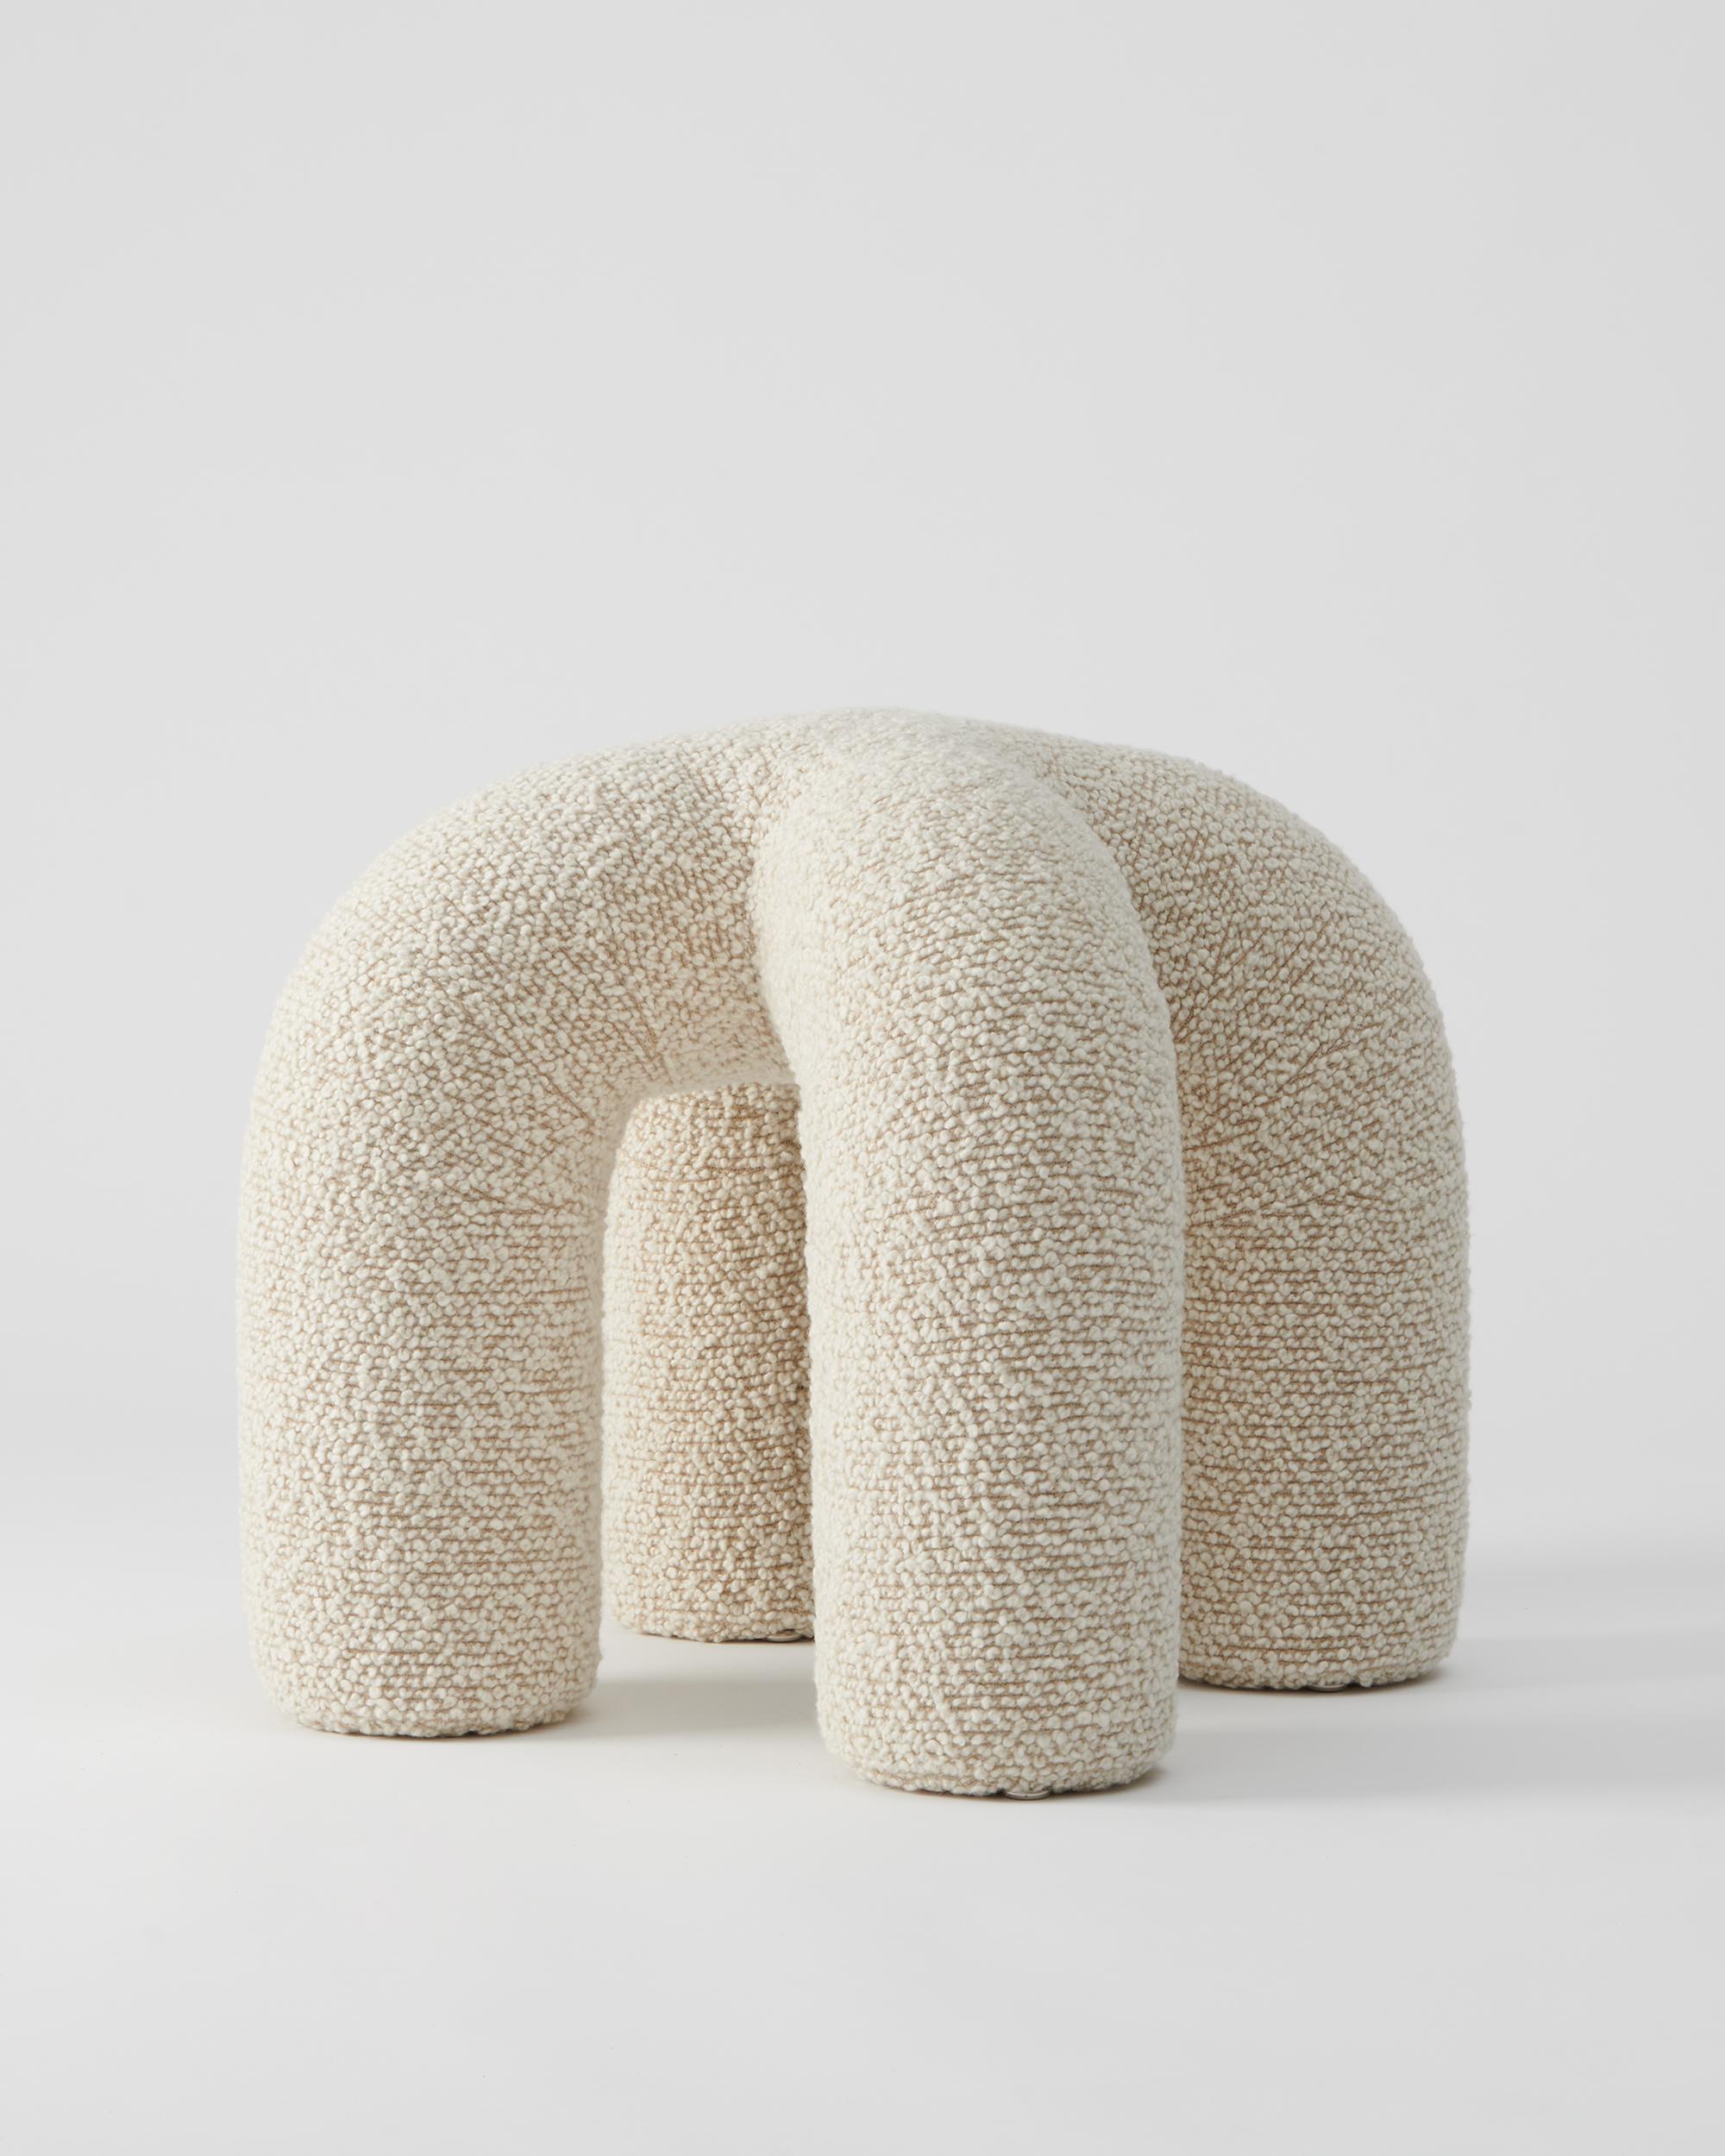 As part of the First Hand collection, part II, the Stitch Stool debuted at the International Contemporary Furniture Fair in 2019.
This upholstered stool is made in Long Island City by a father-son duo.